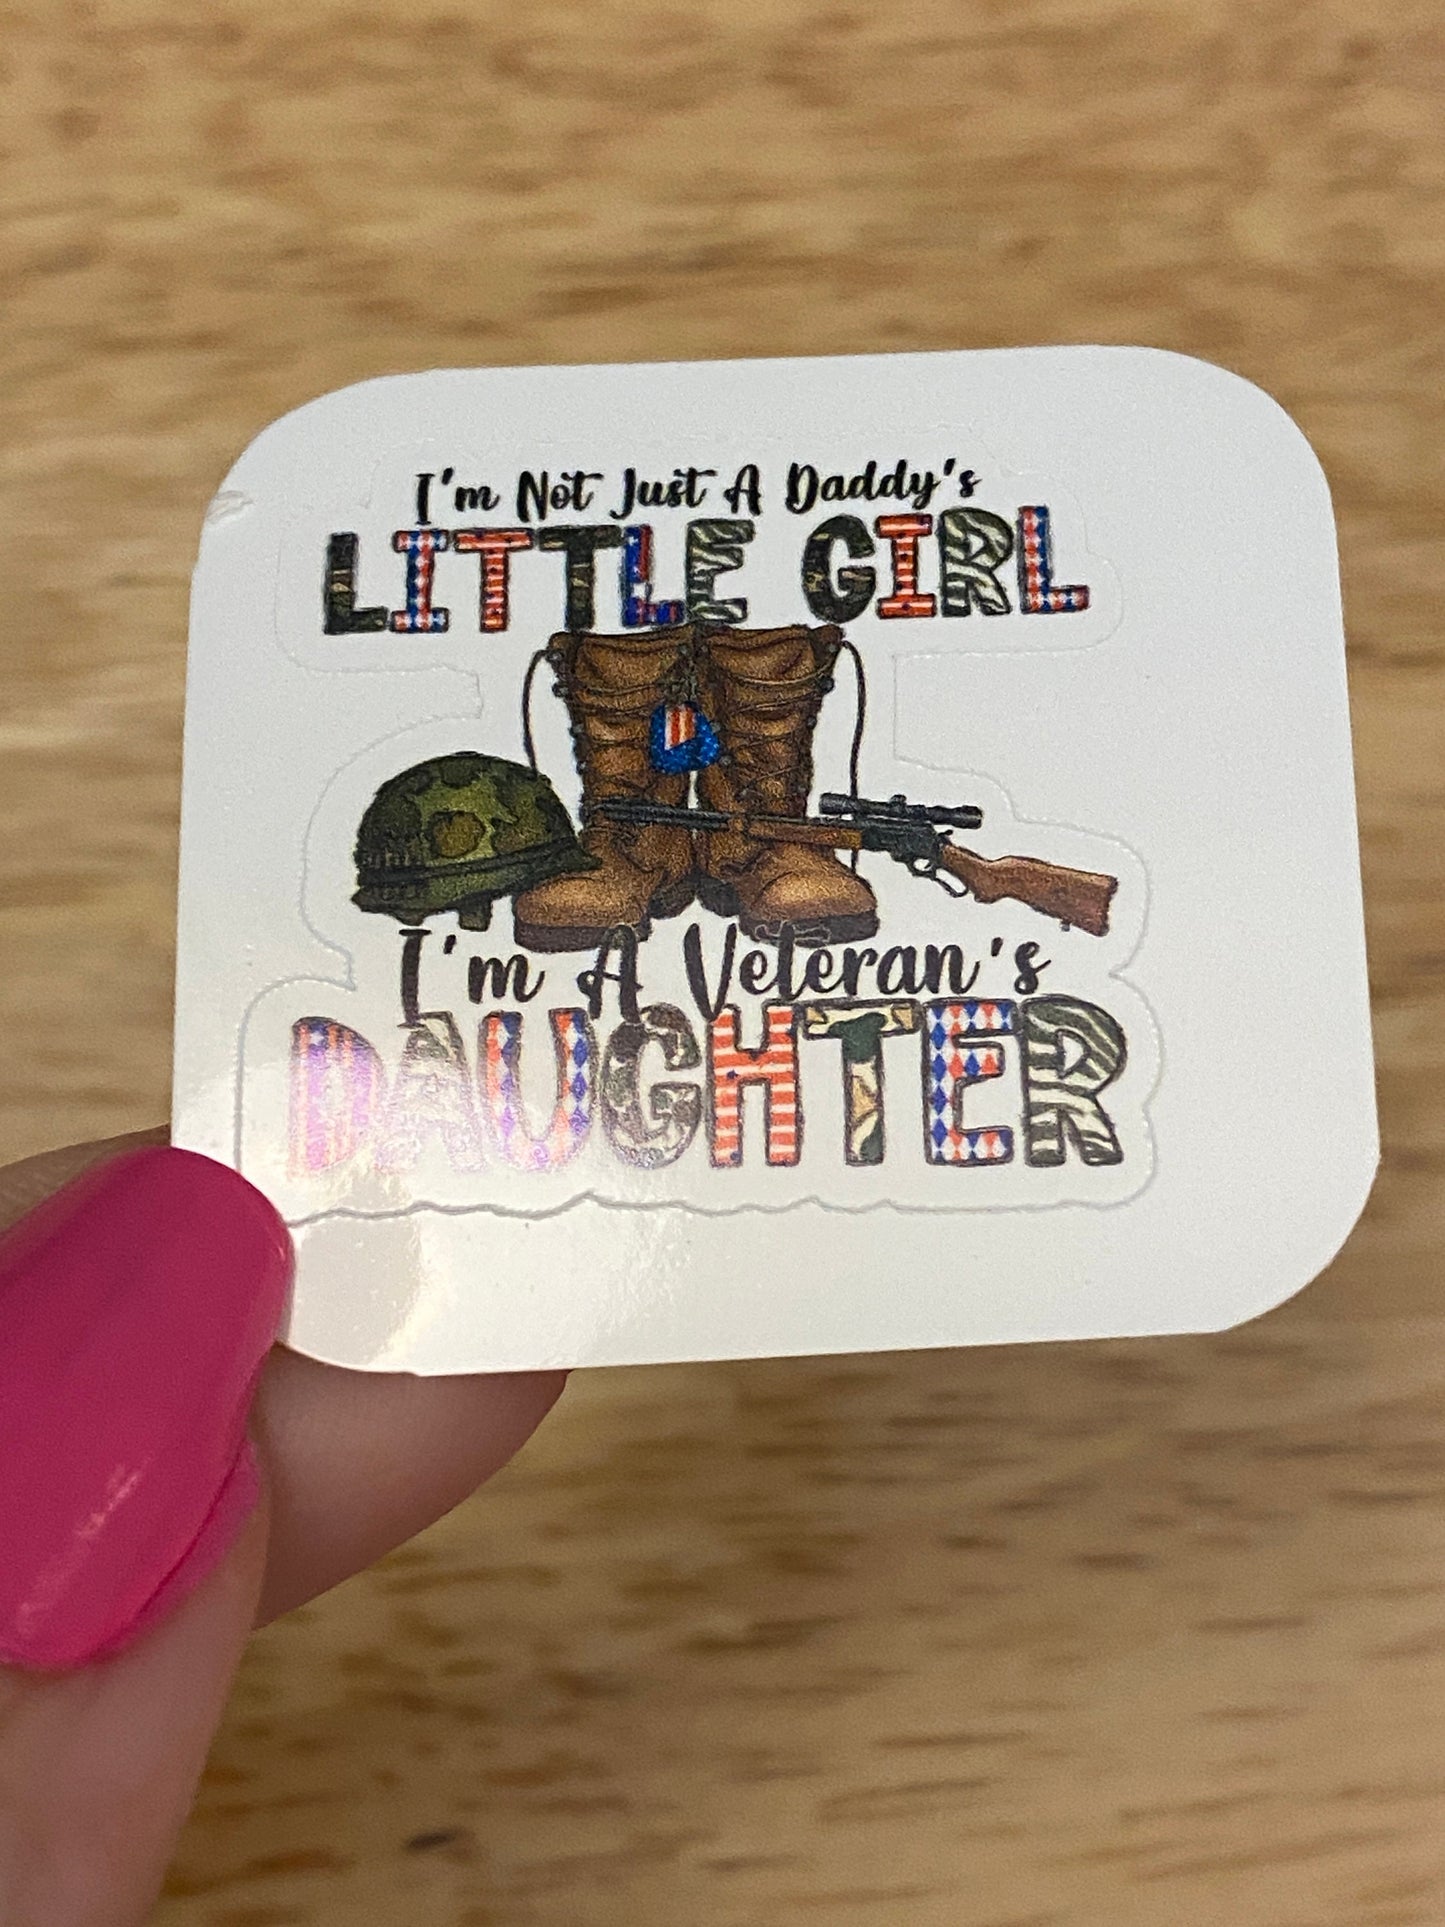 I'm not just a Daddy's Little Girl I'm a Veteran's Daughter Sticker, Military Sticker, Daughter Daddy Sticker, Veteran's Sticker